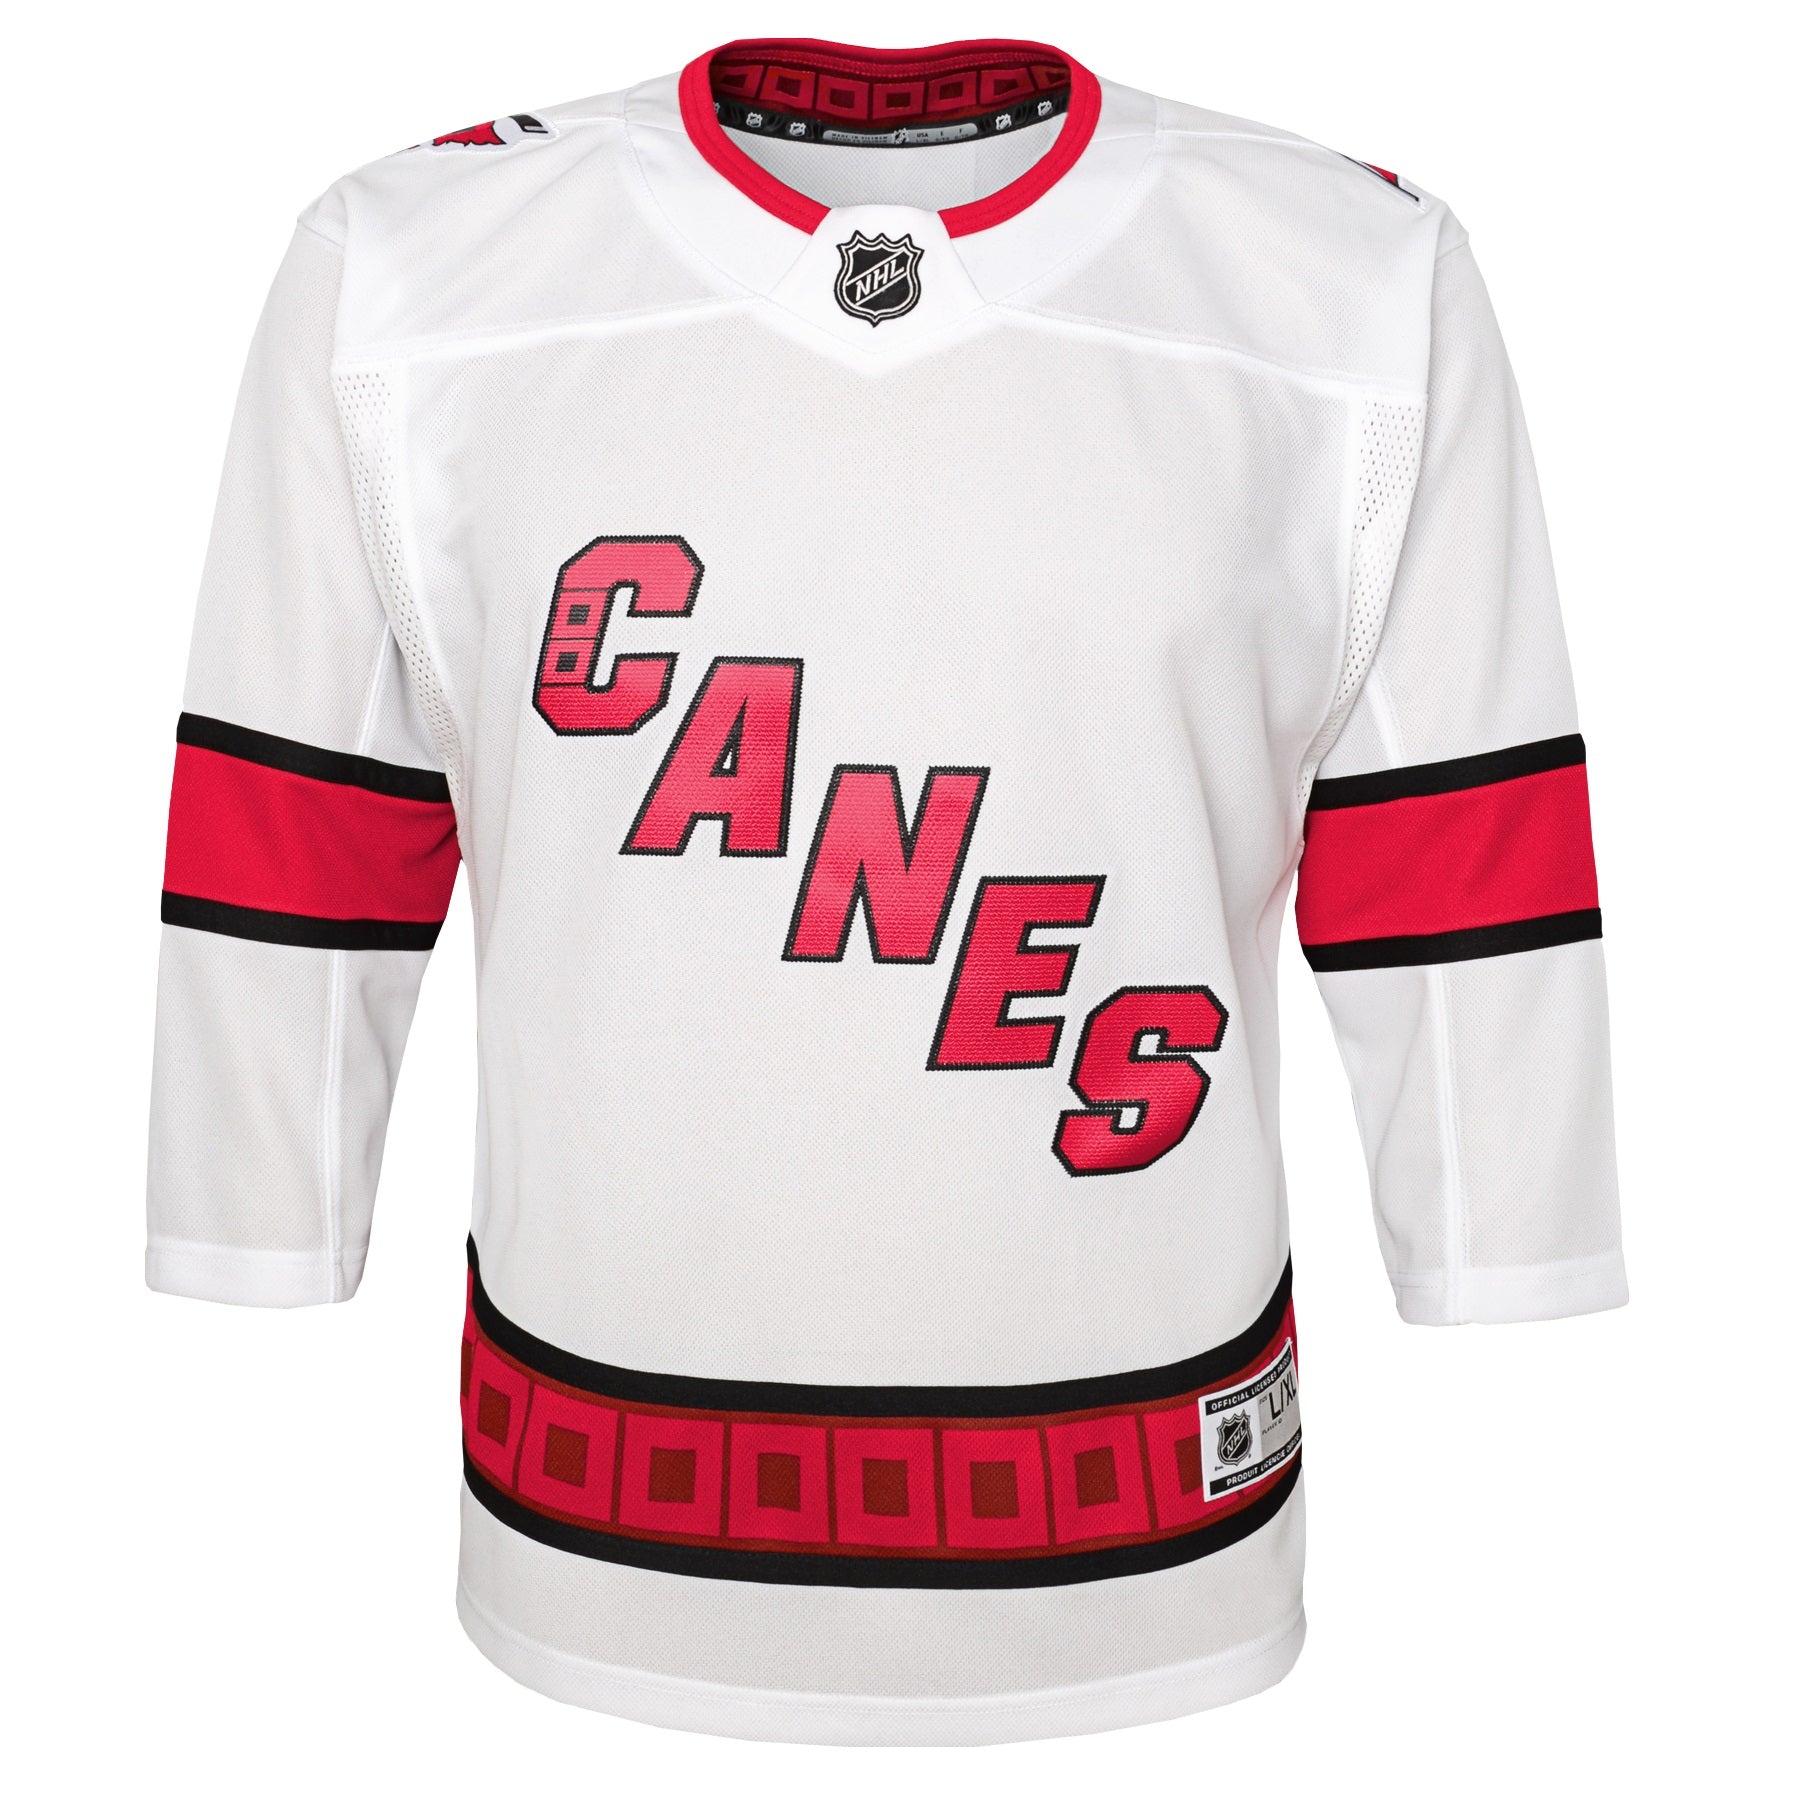 White jersey with Canes diagonal wordmark on front and warning flag striping at waist